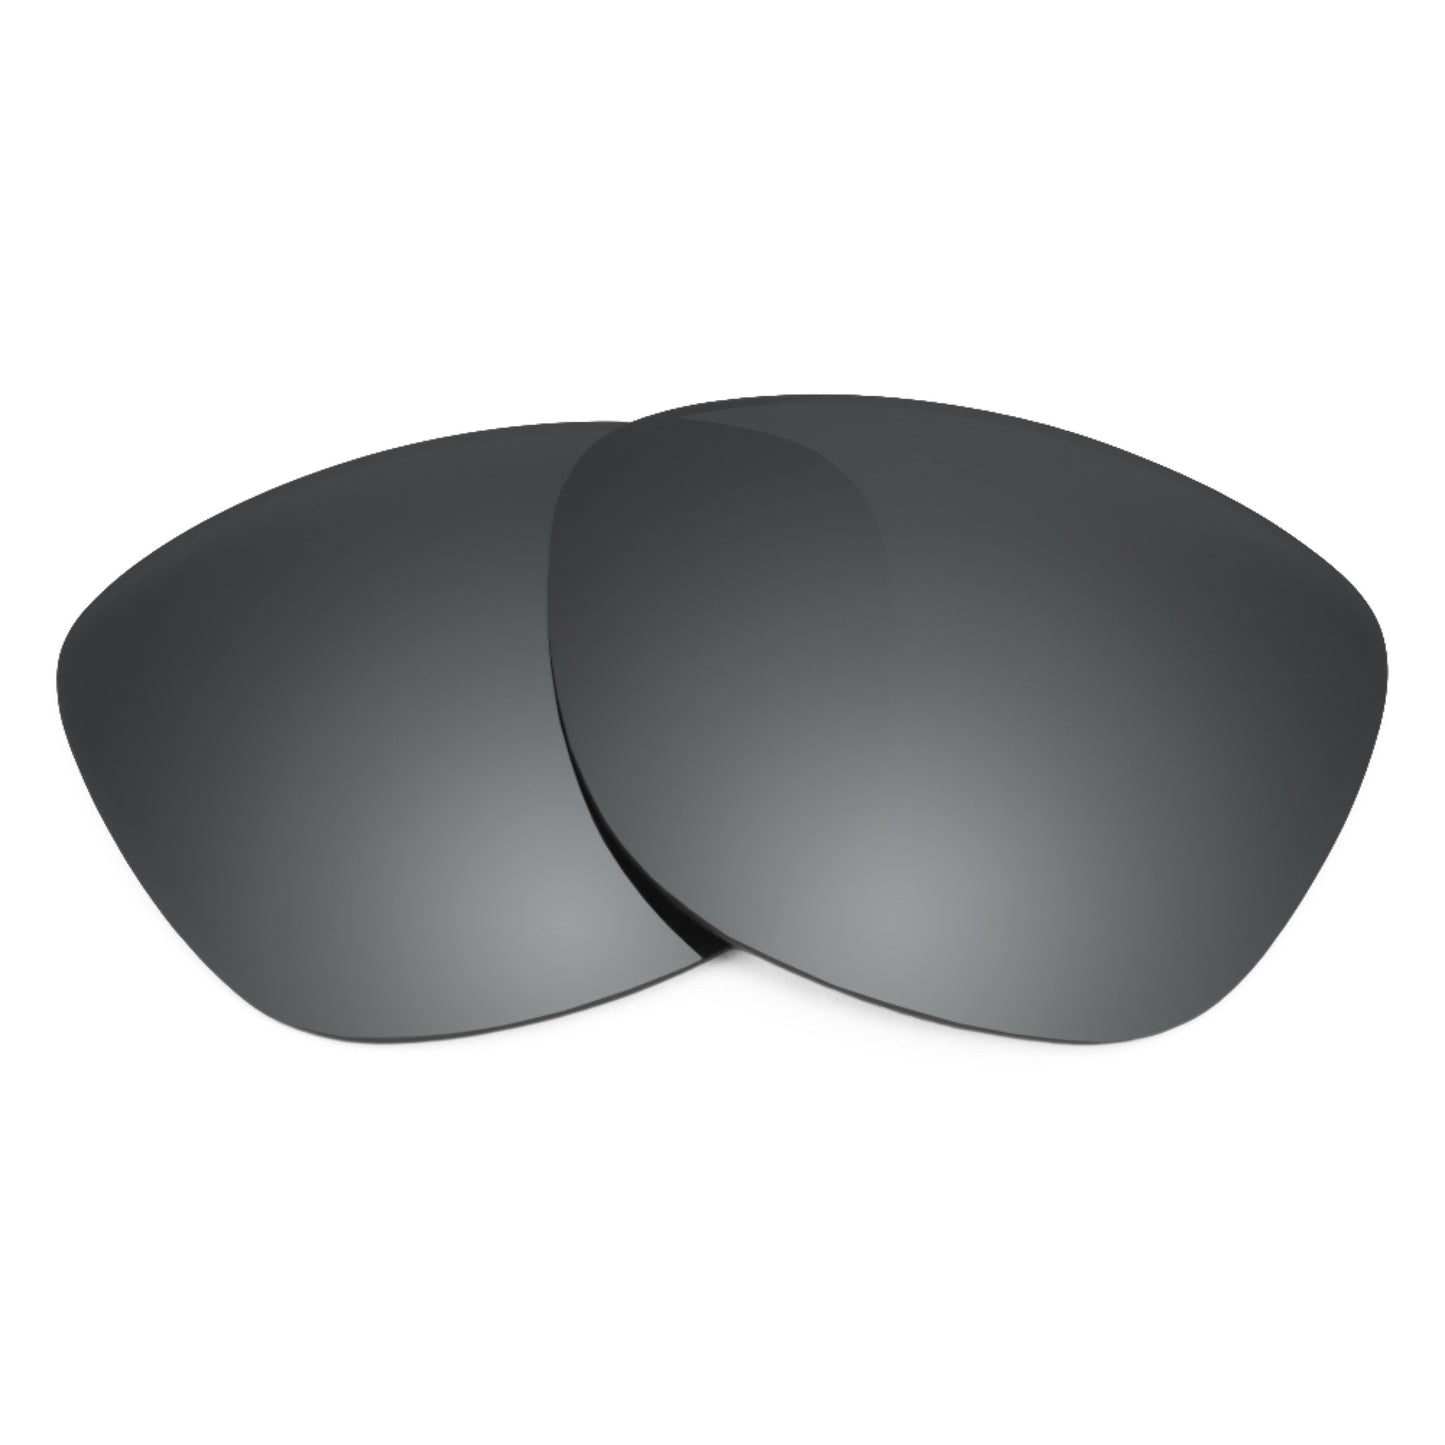 Revant replacement lenses for Ray-Ban Justin Classic RB4165 55mm Non-Polarized Black Chrome